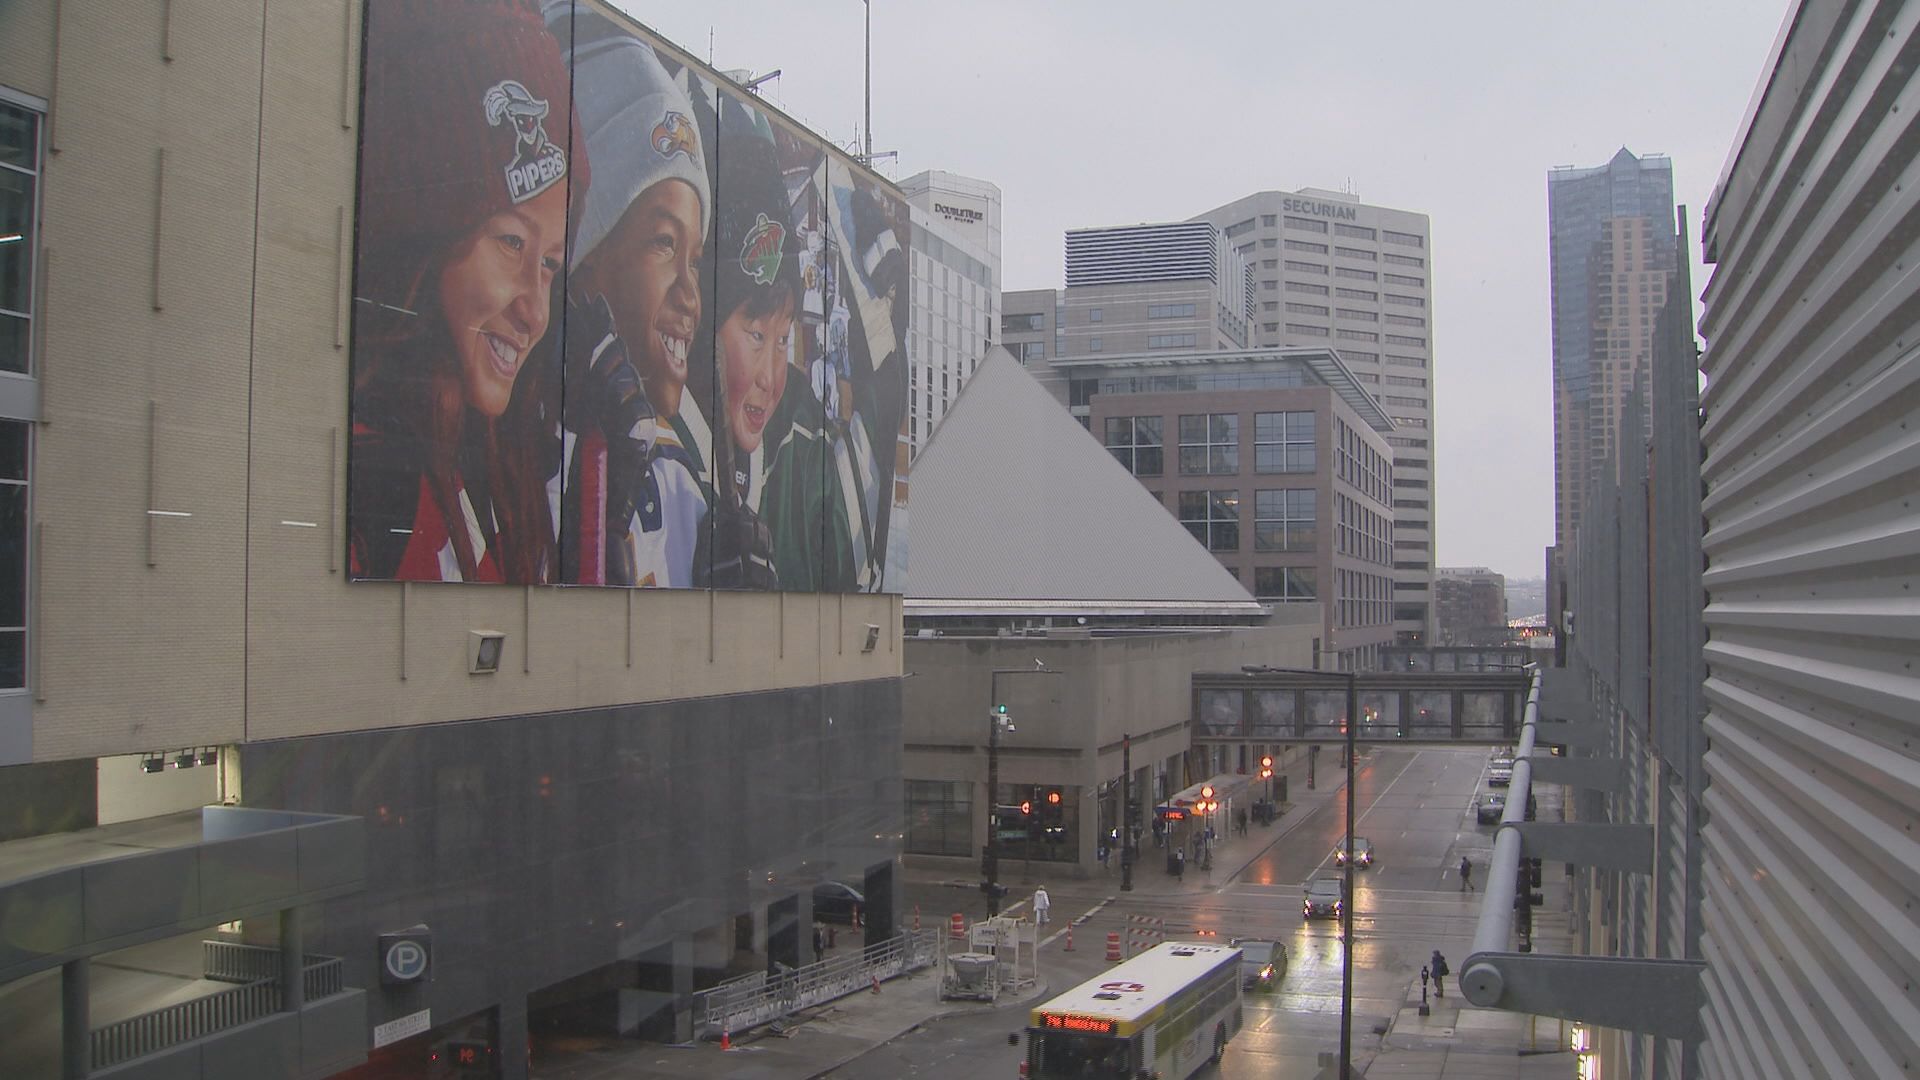 Minnesota Wild building ice rink on top of old Macy's store